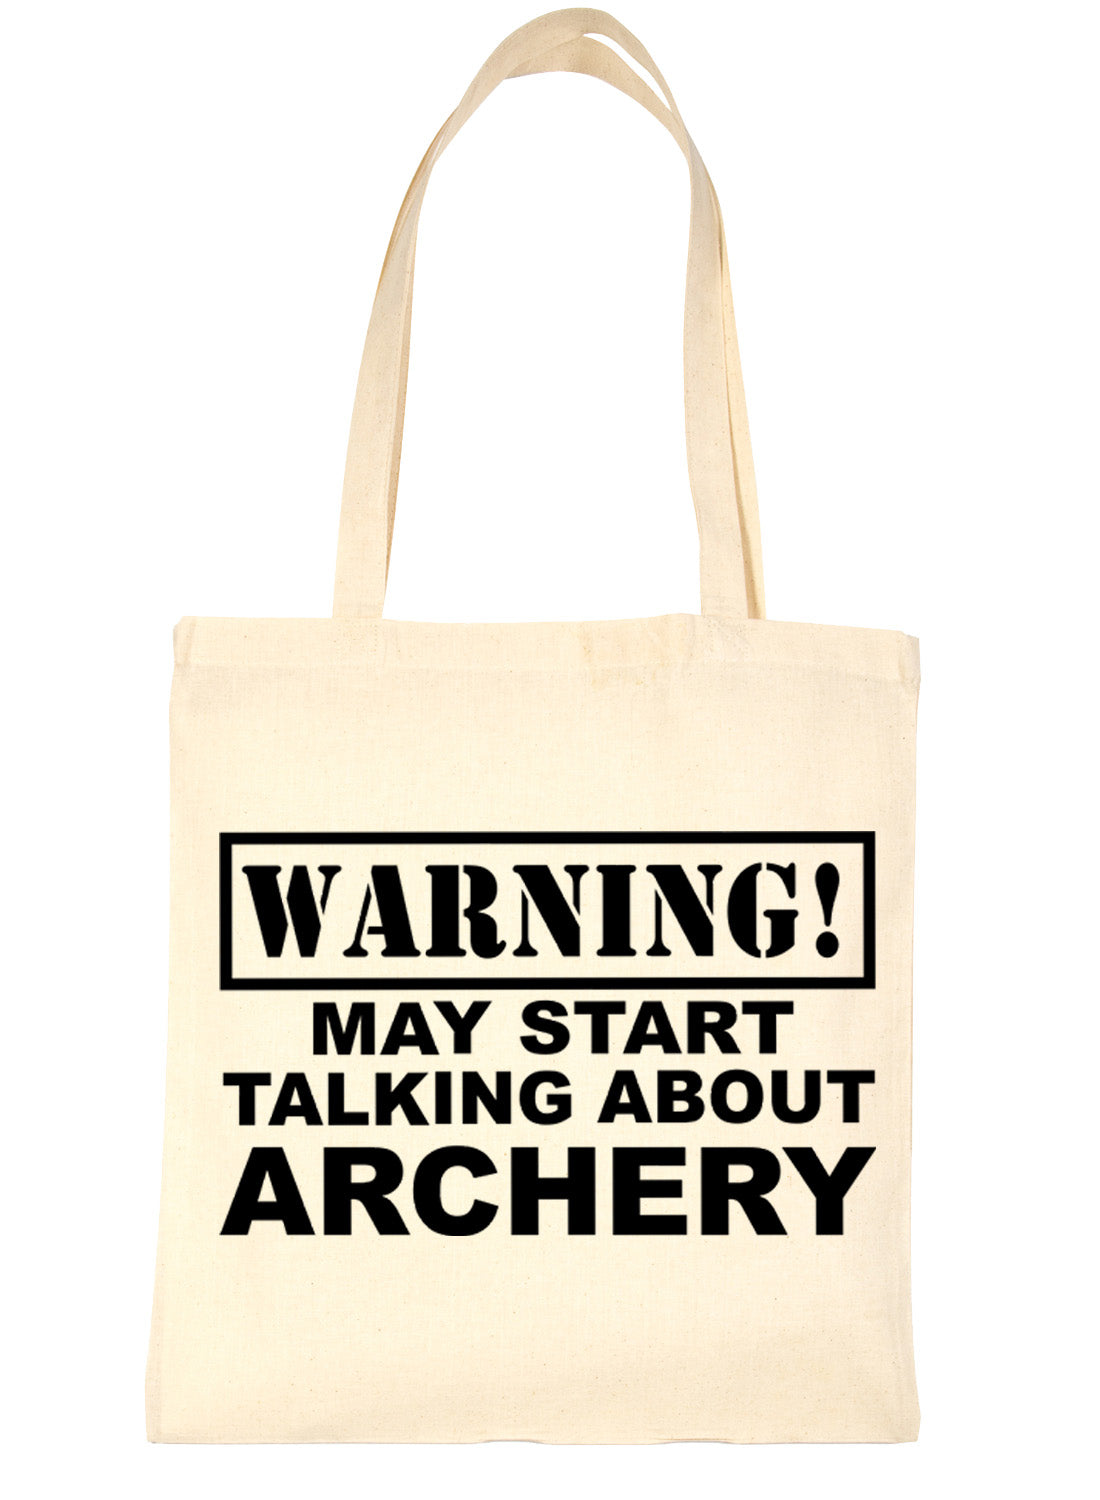 Warning May Talk About Archery Bag For Life Shopping Tote Bag